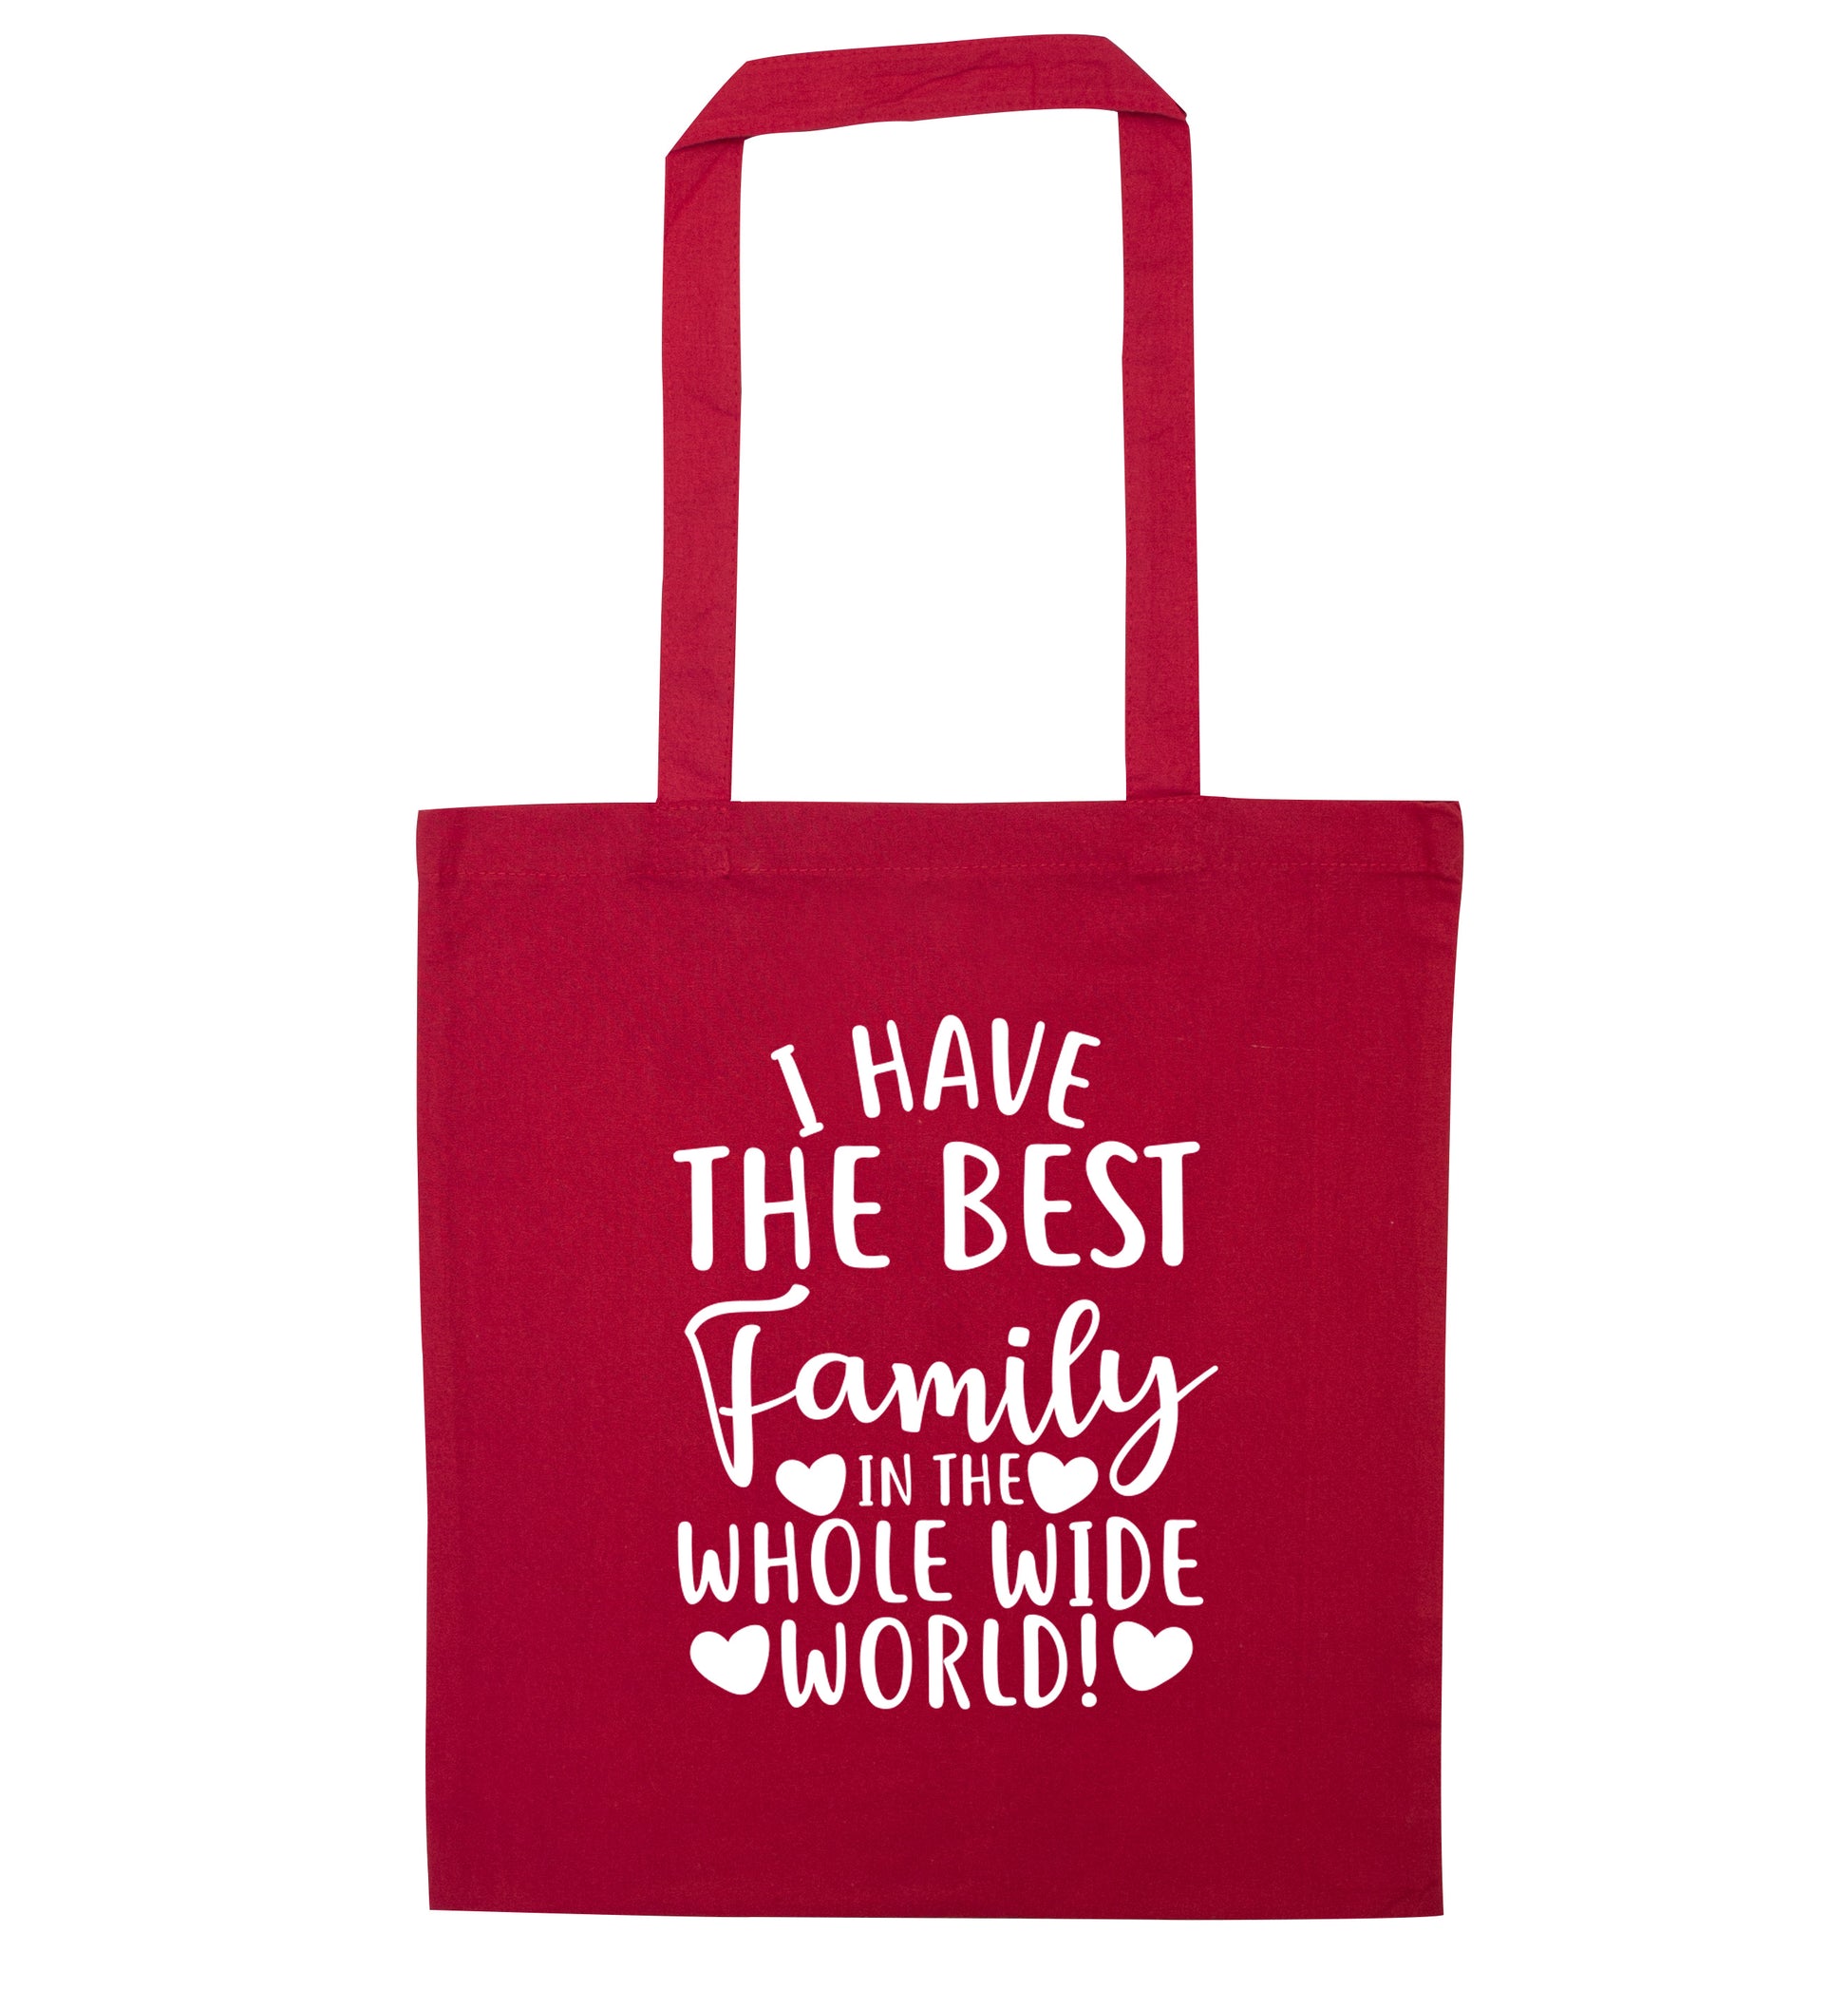 I have the best family in the whole wide world! red tote bag